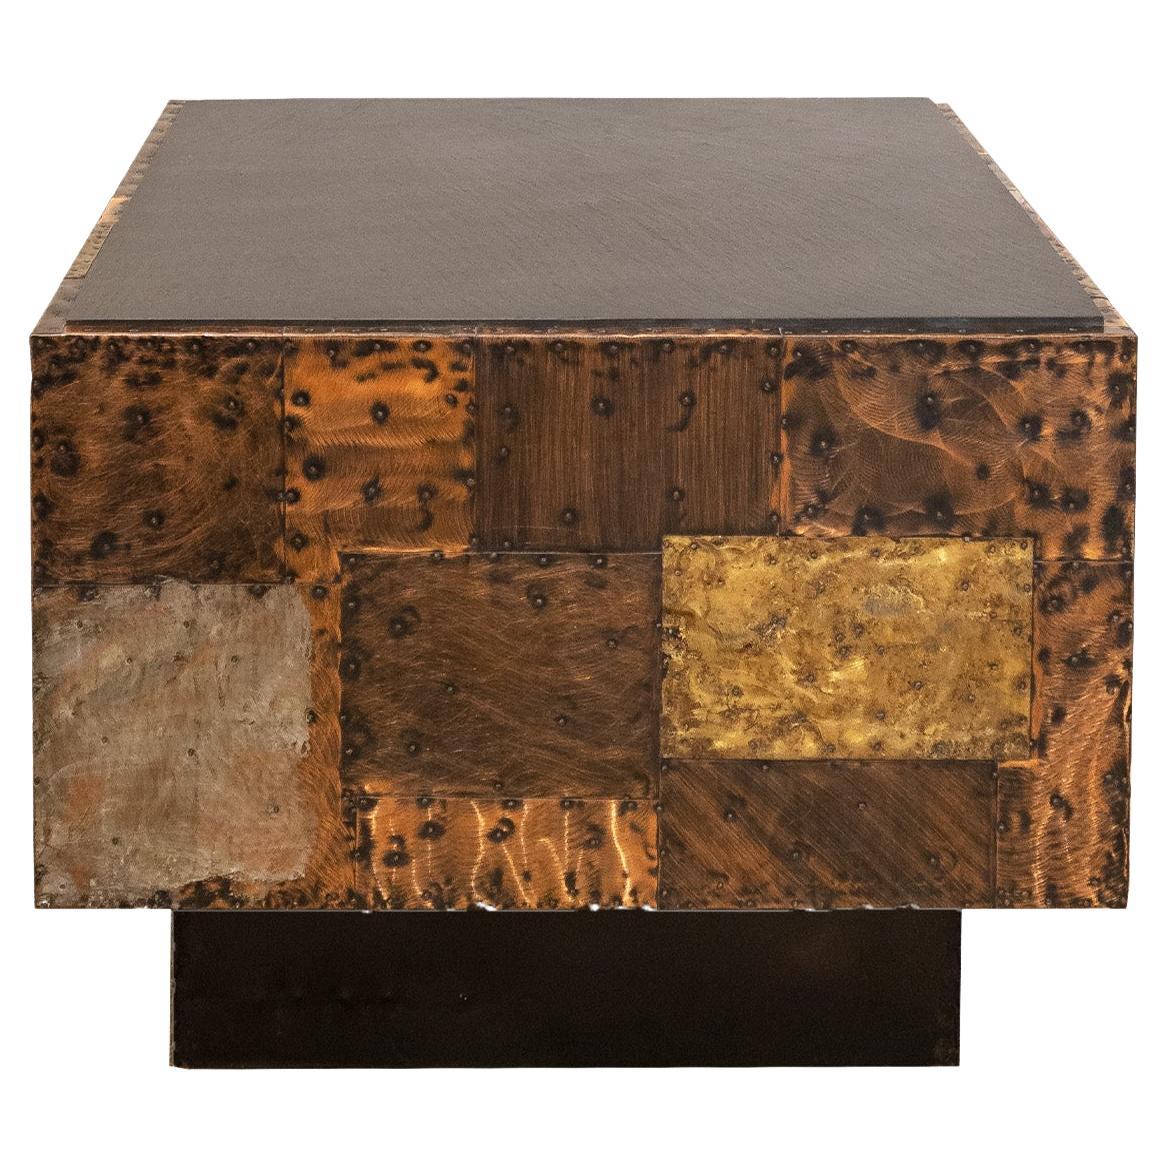 Paul Evans Hand-Welded Patchwork Cube Side Table 1970s